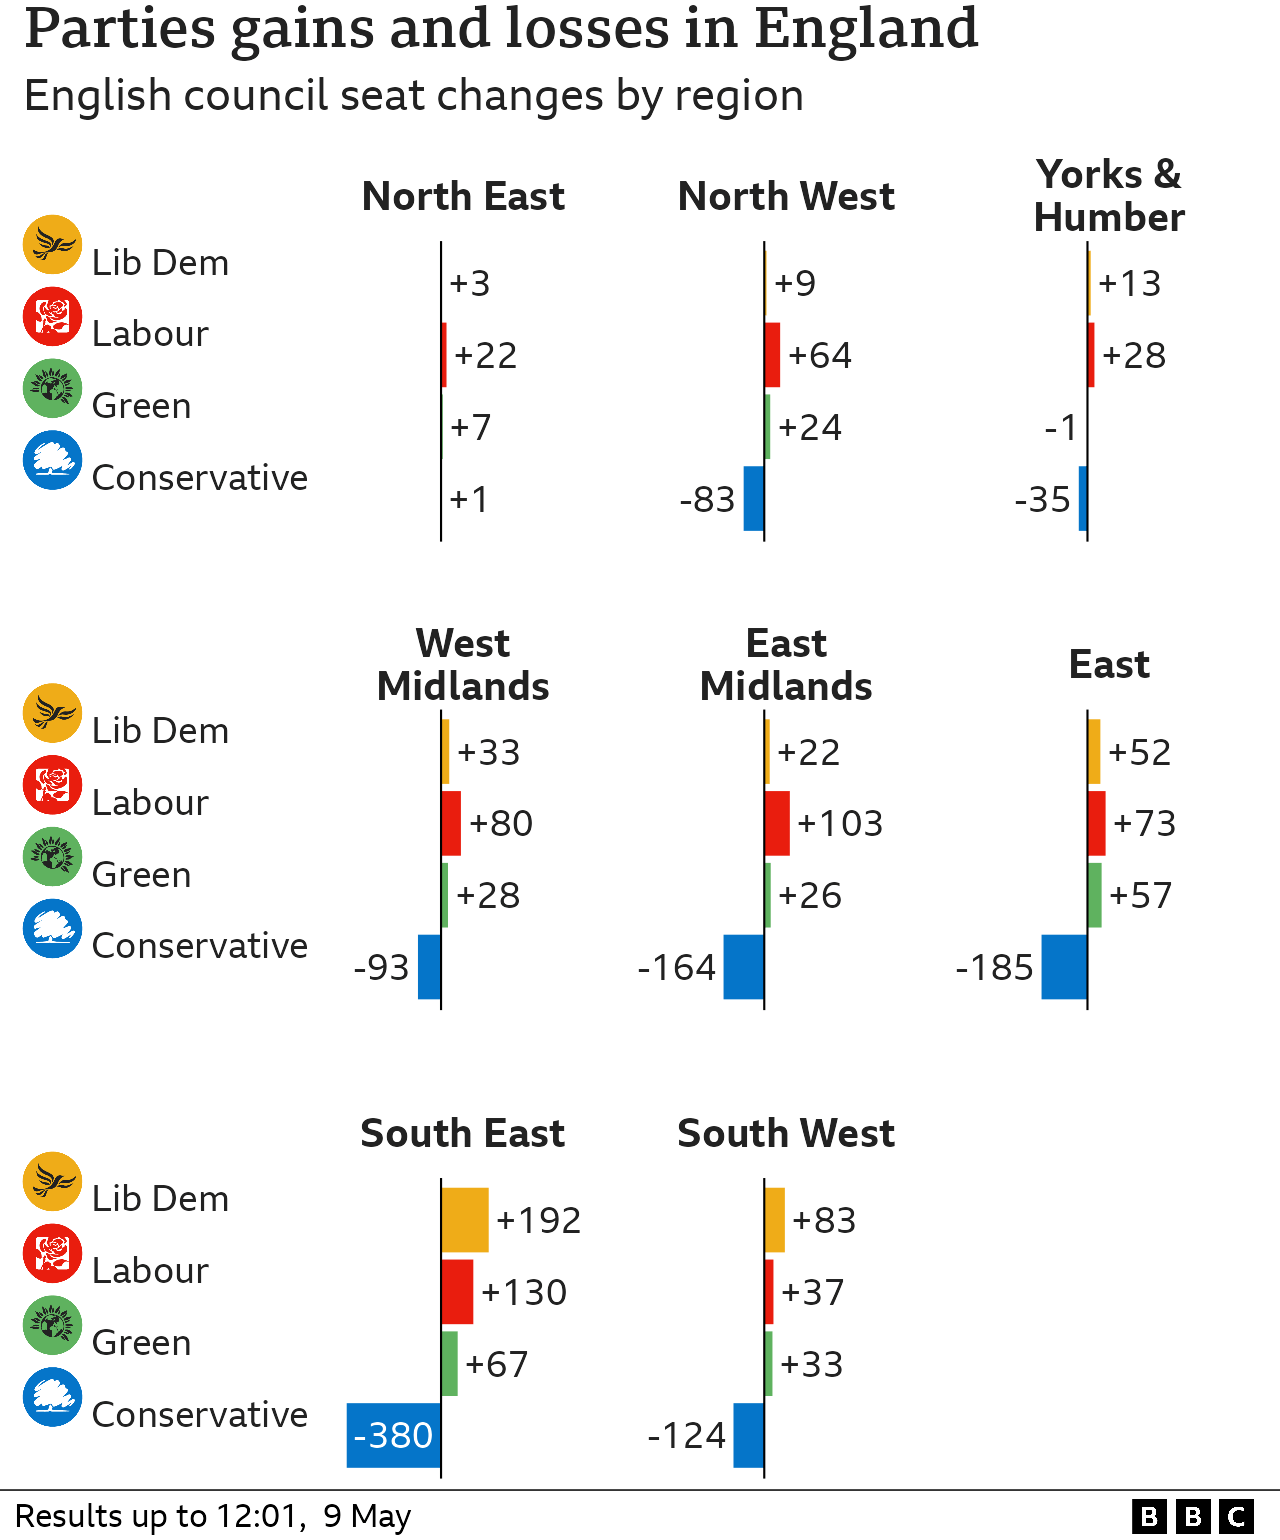 Bar chart of regions showing gains and losses of main parties. Conservatives lost in 7 out of 8 areas. Lib Dem’s and Labour made gains everywhere. Greens made gains everywhere but Yorkshire and the Humber